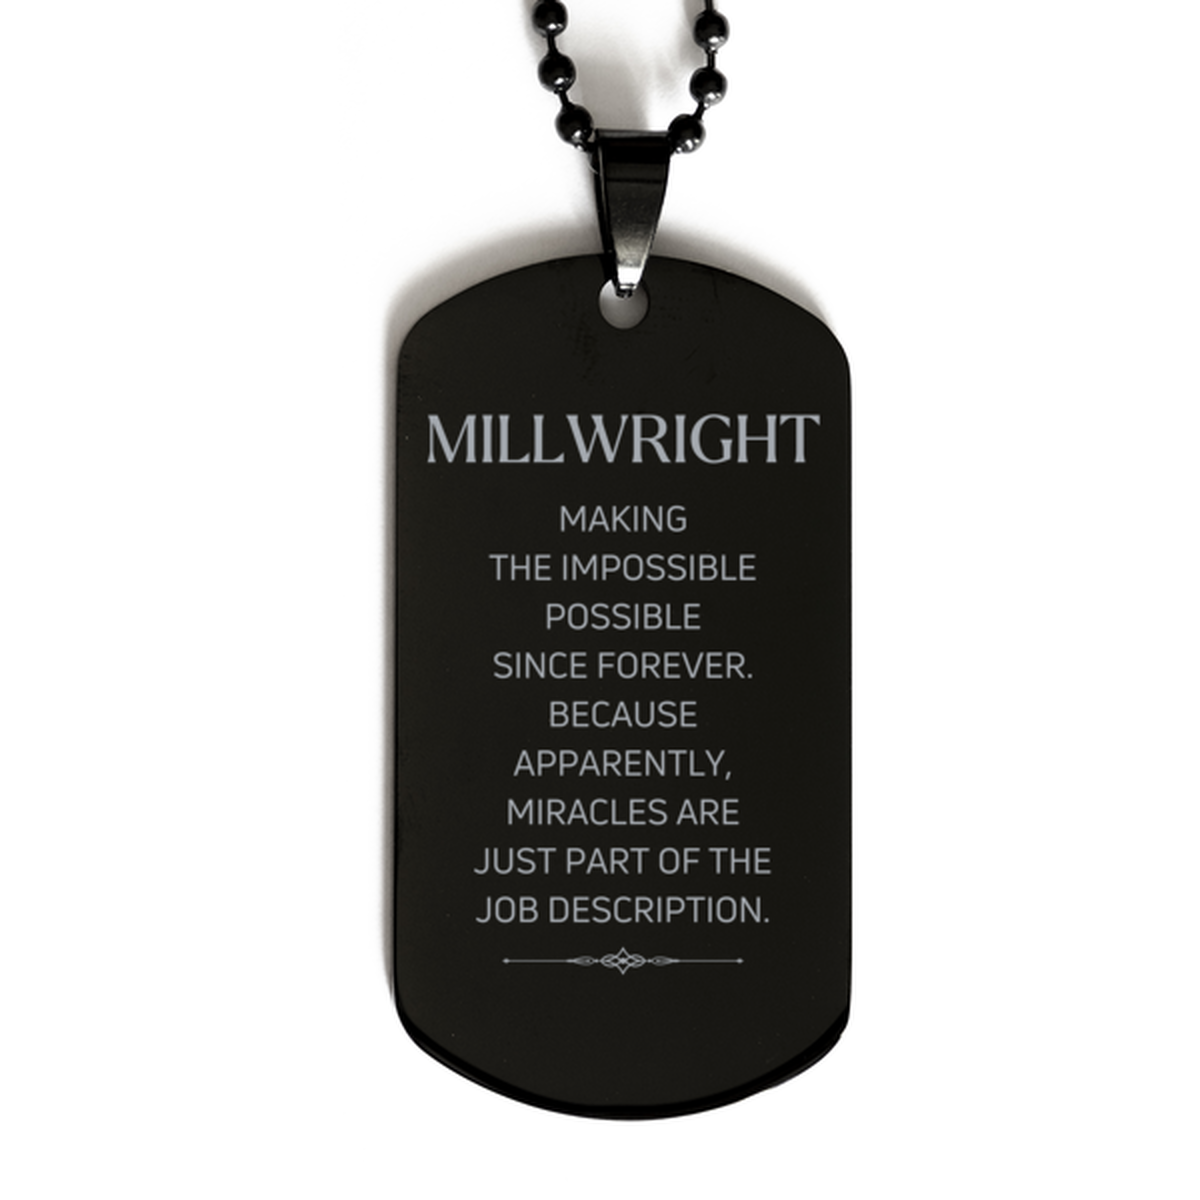 Funny Millwright Gifts, Miracles are just part of the job description, Inspirational Birthday Black Dog Tag For Millwright, Men, Women, Coworkers, Friends, Boss